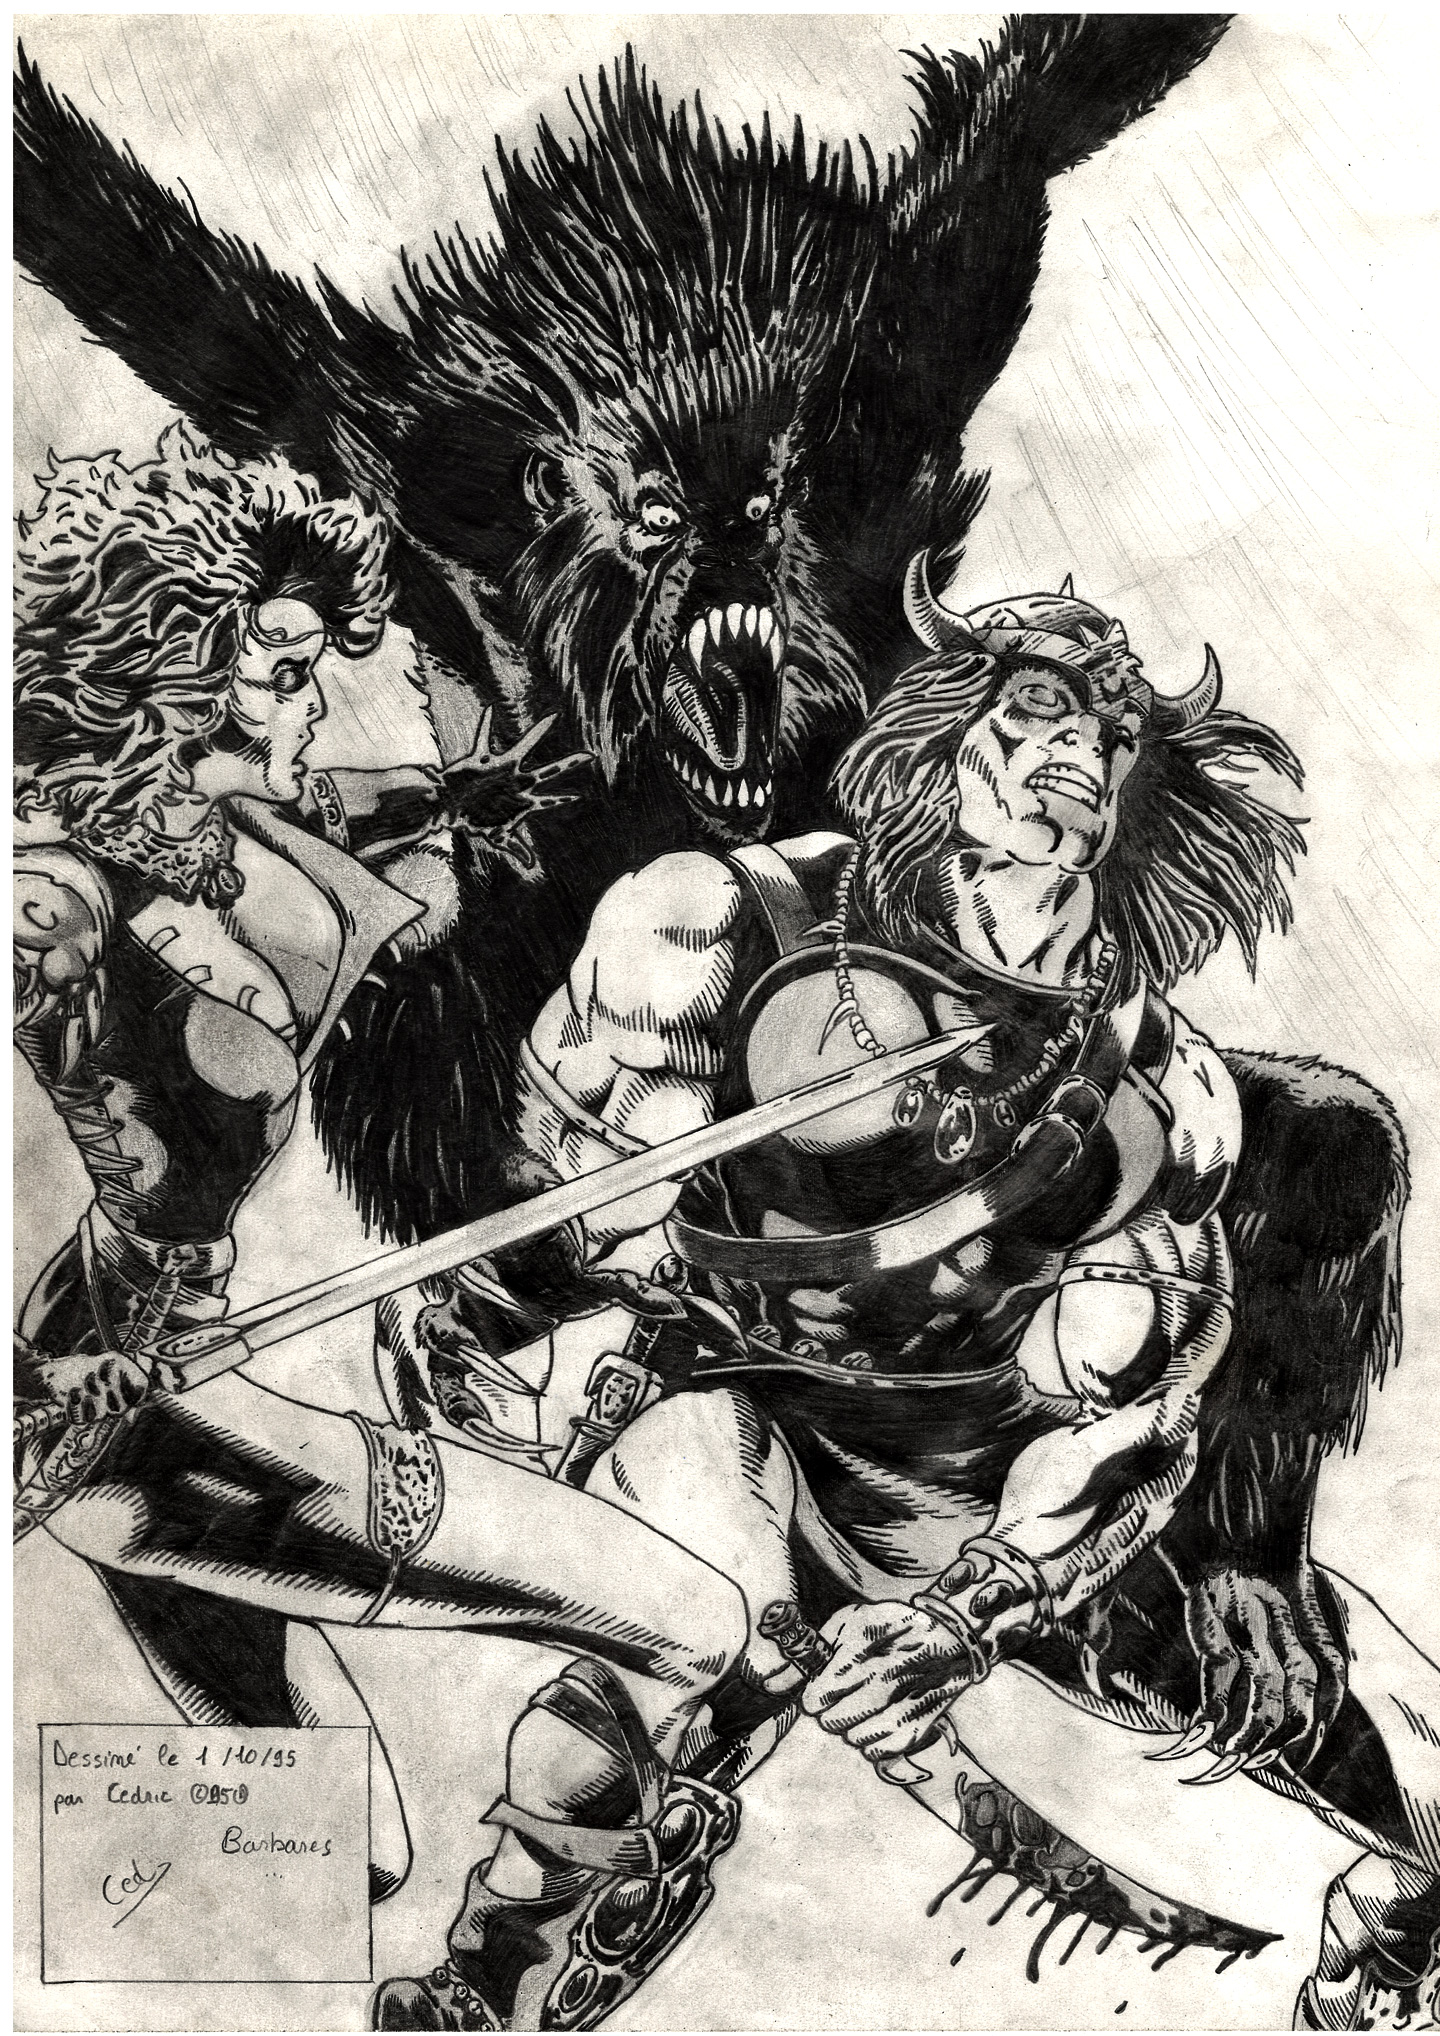 A drawing about Conan from Marvel Comics